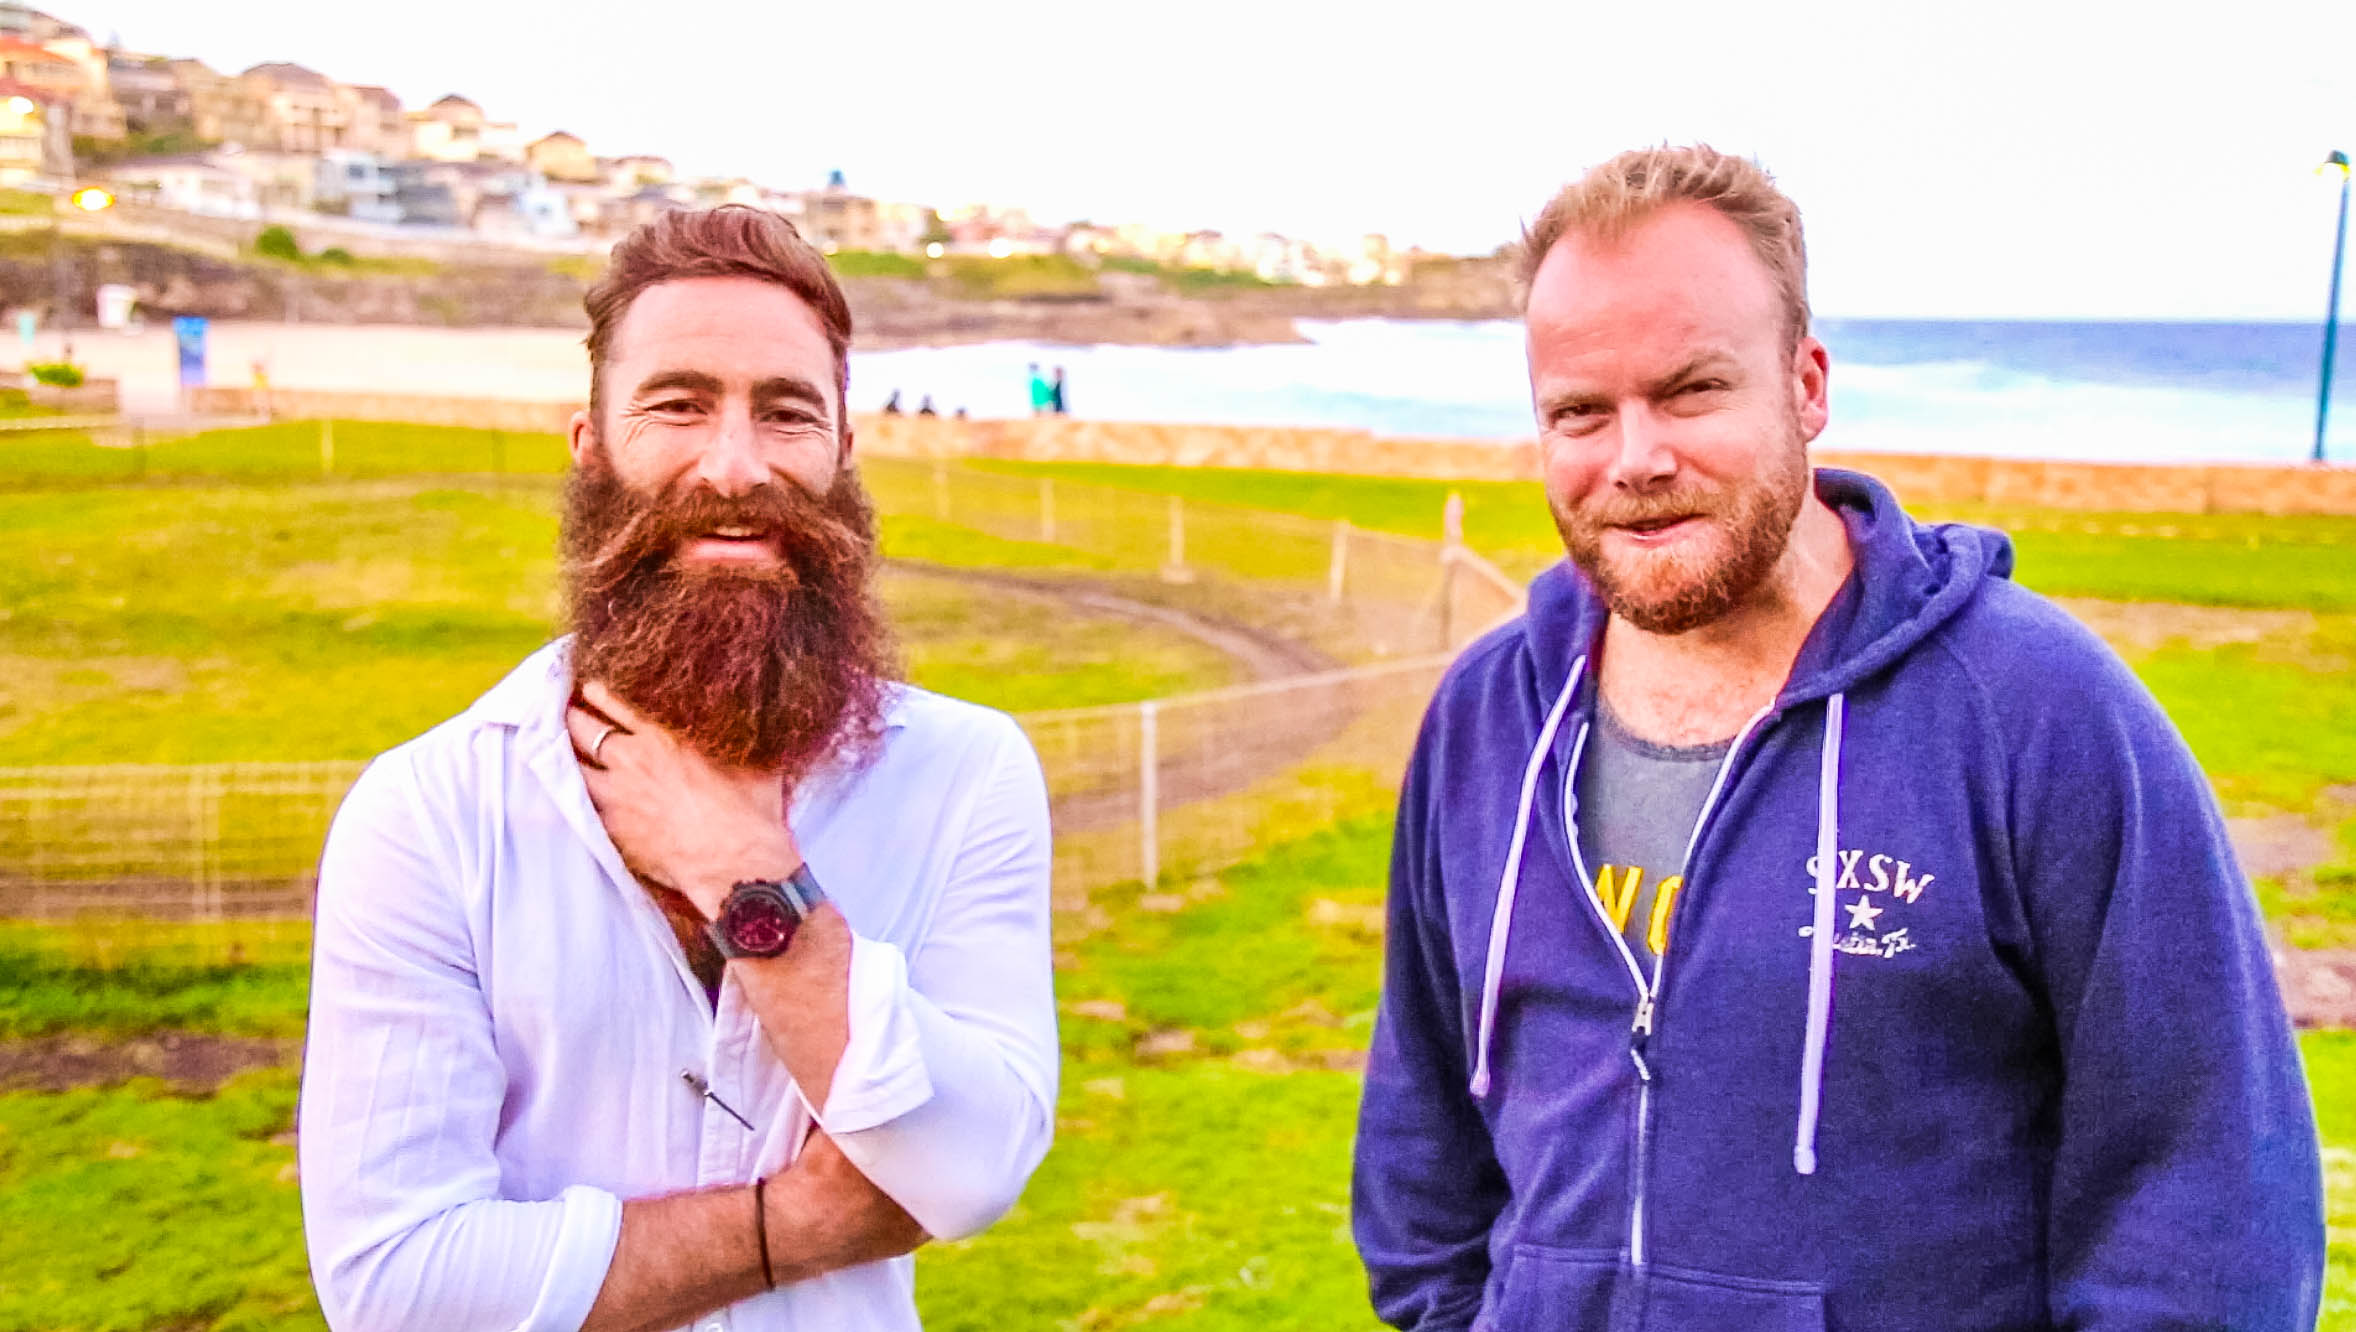 Jimmy Niggles - Beard Season founder joins the Hot & Delicious: Rocks The Planet! podcast in Sydney.